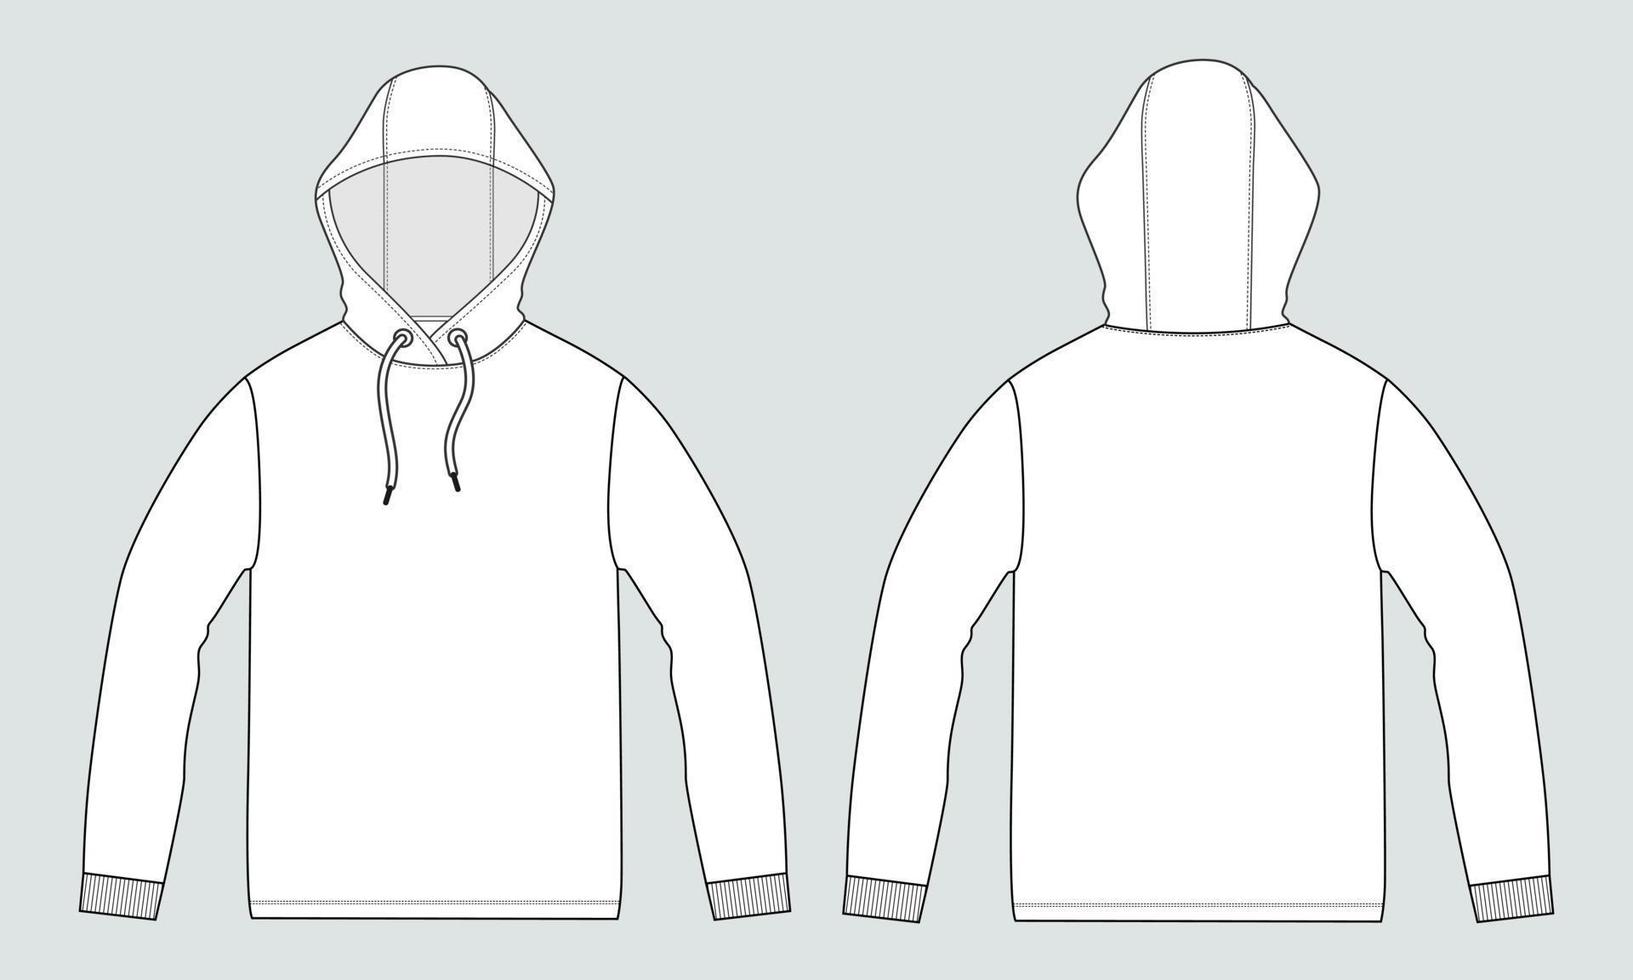 Long Sleeve Hoodie technical fashion flat sketch vector illustration template front and back views. Fleece jersey sweatshirt hoodie mock up for men's and boys.